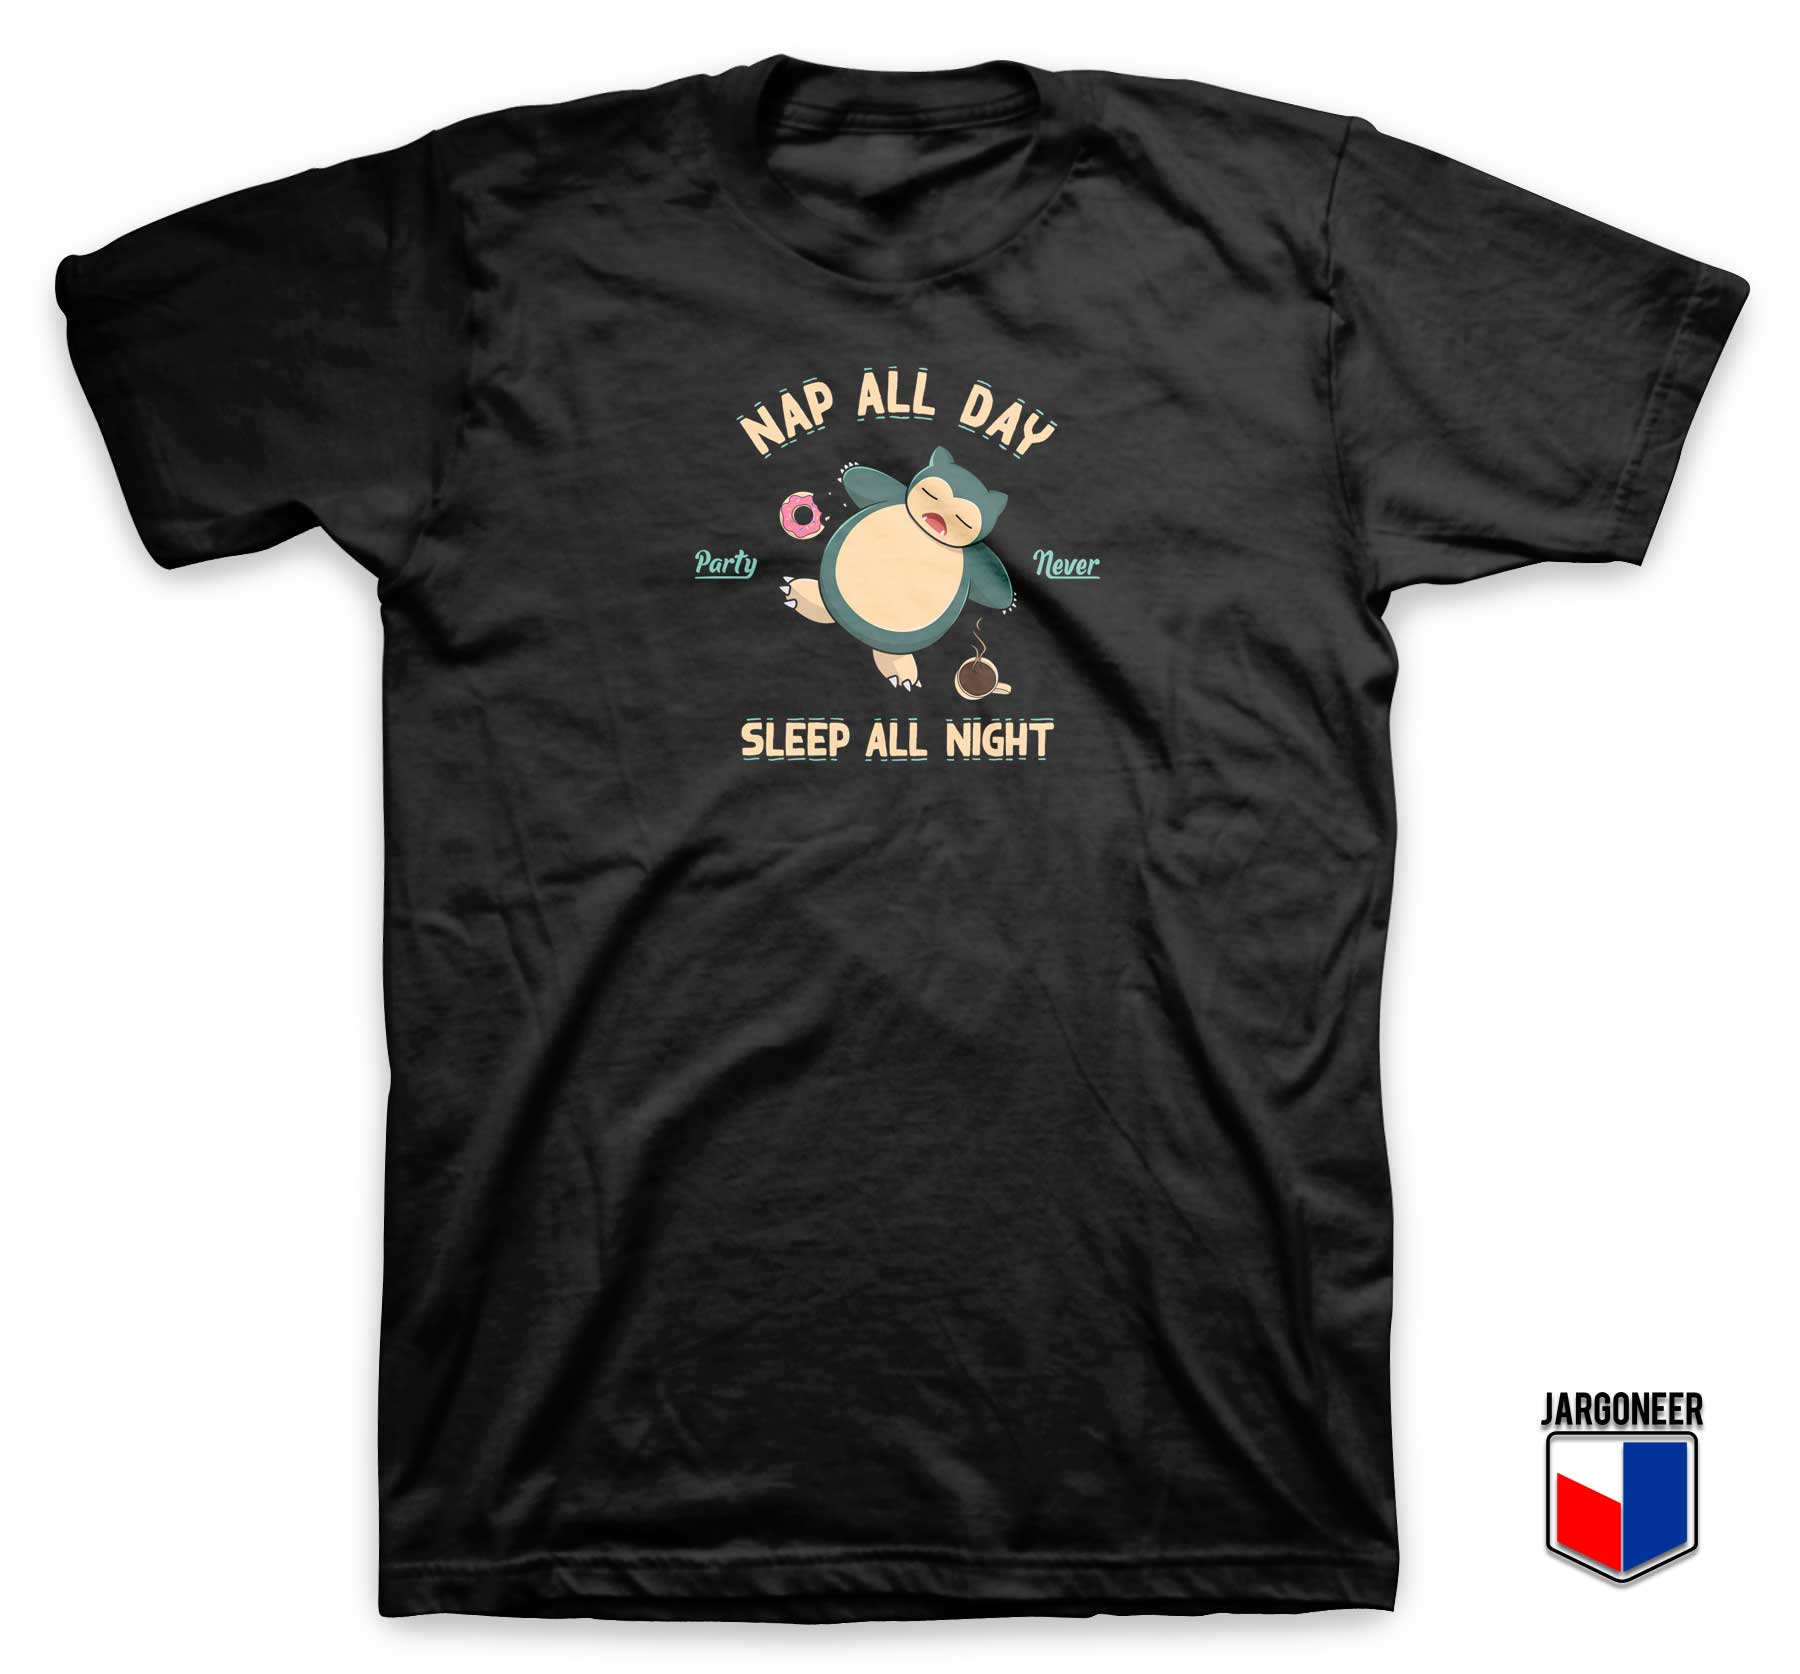 Nap All Day Sleep All Night T Shirt - Shop Unique Graphic Cool Shirt Designs